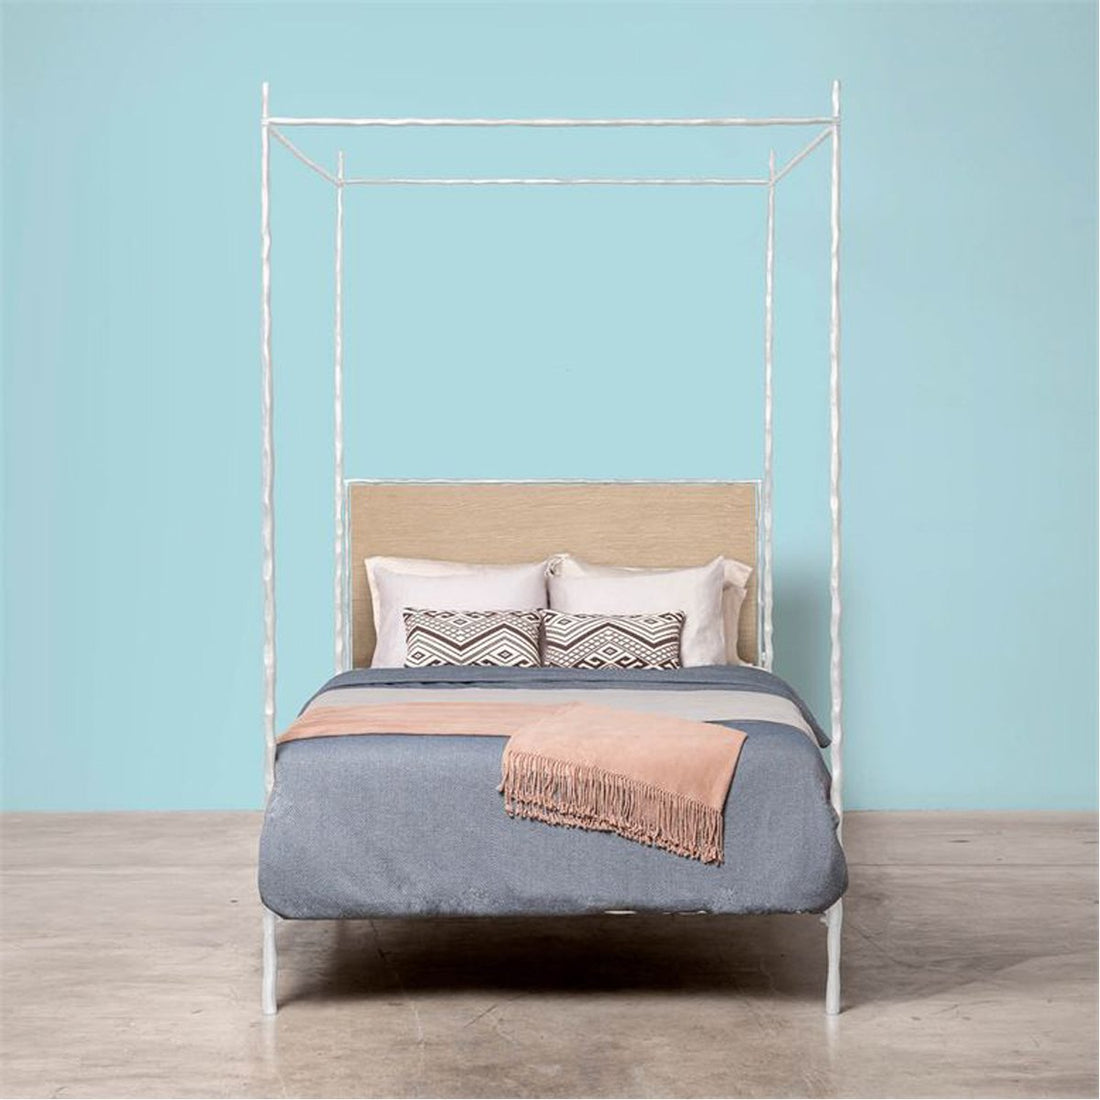 Made Goods Brennan Tall Textured Canopy Bed in Garonne Leather